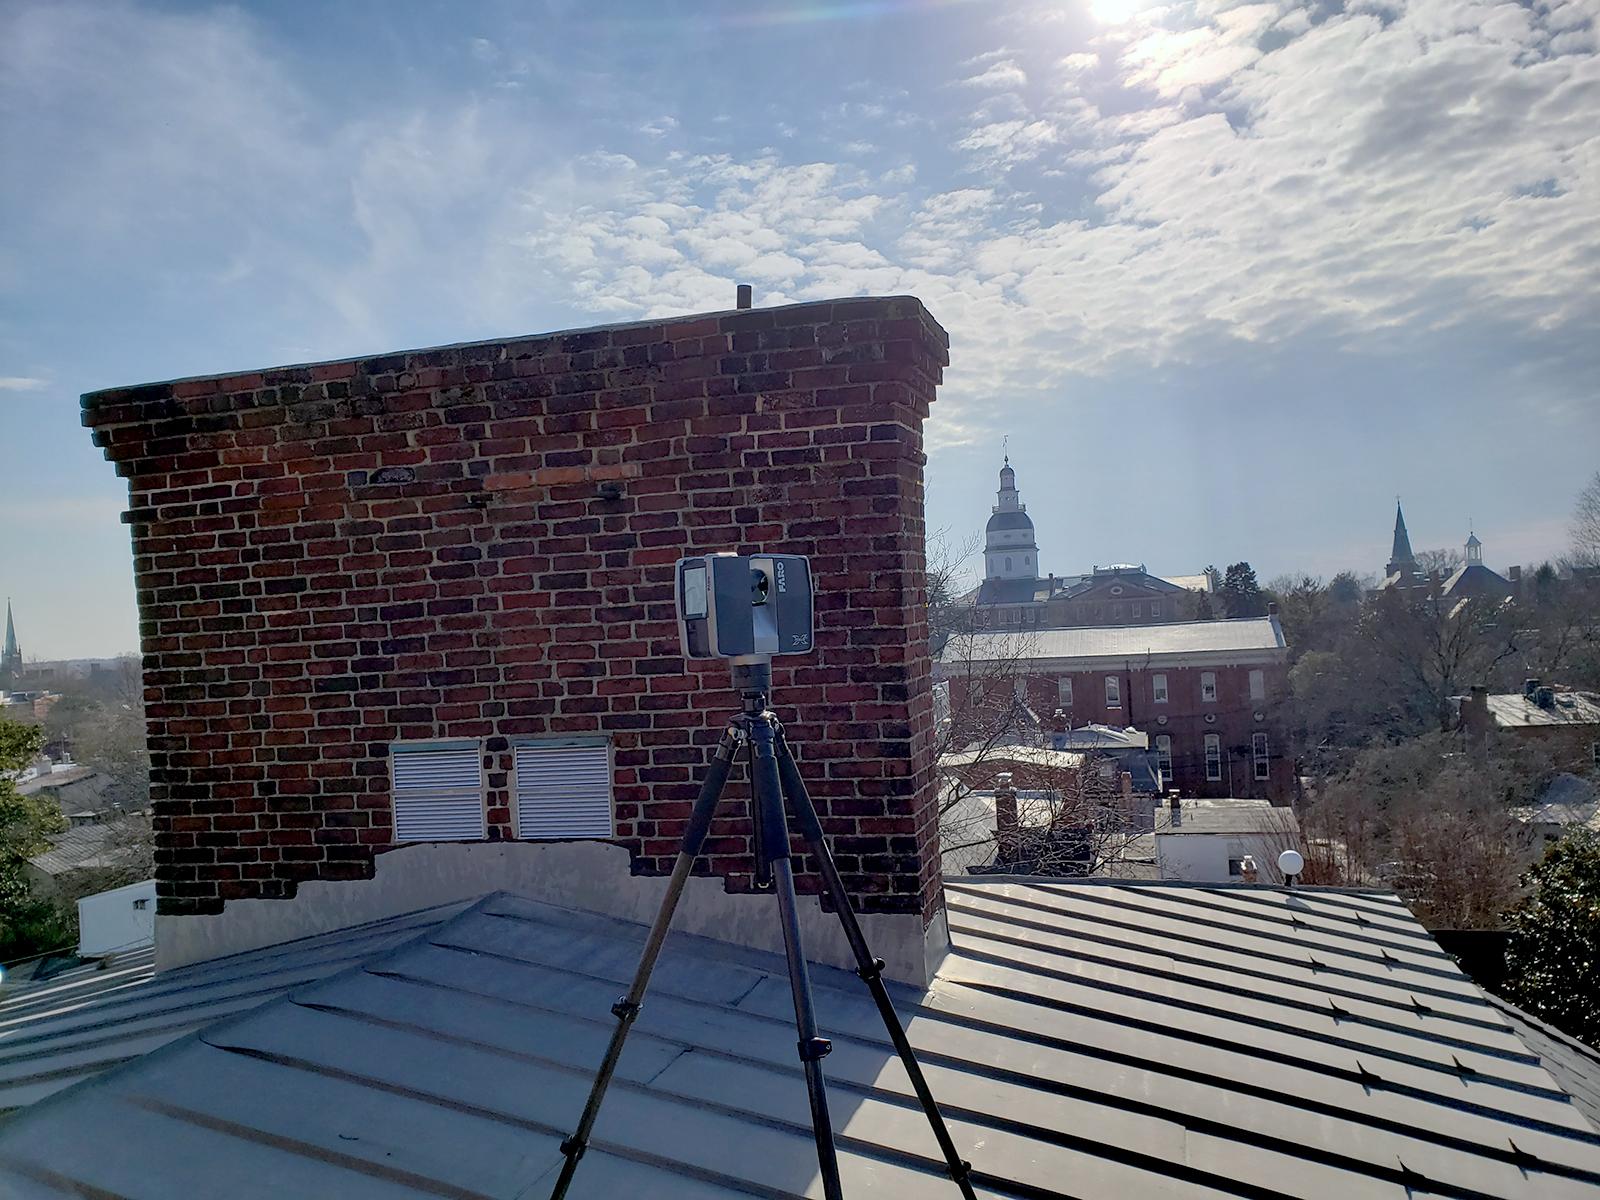 Laser scanning the Chase Lloyd house